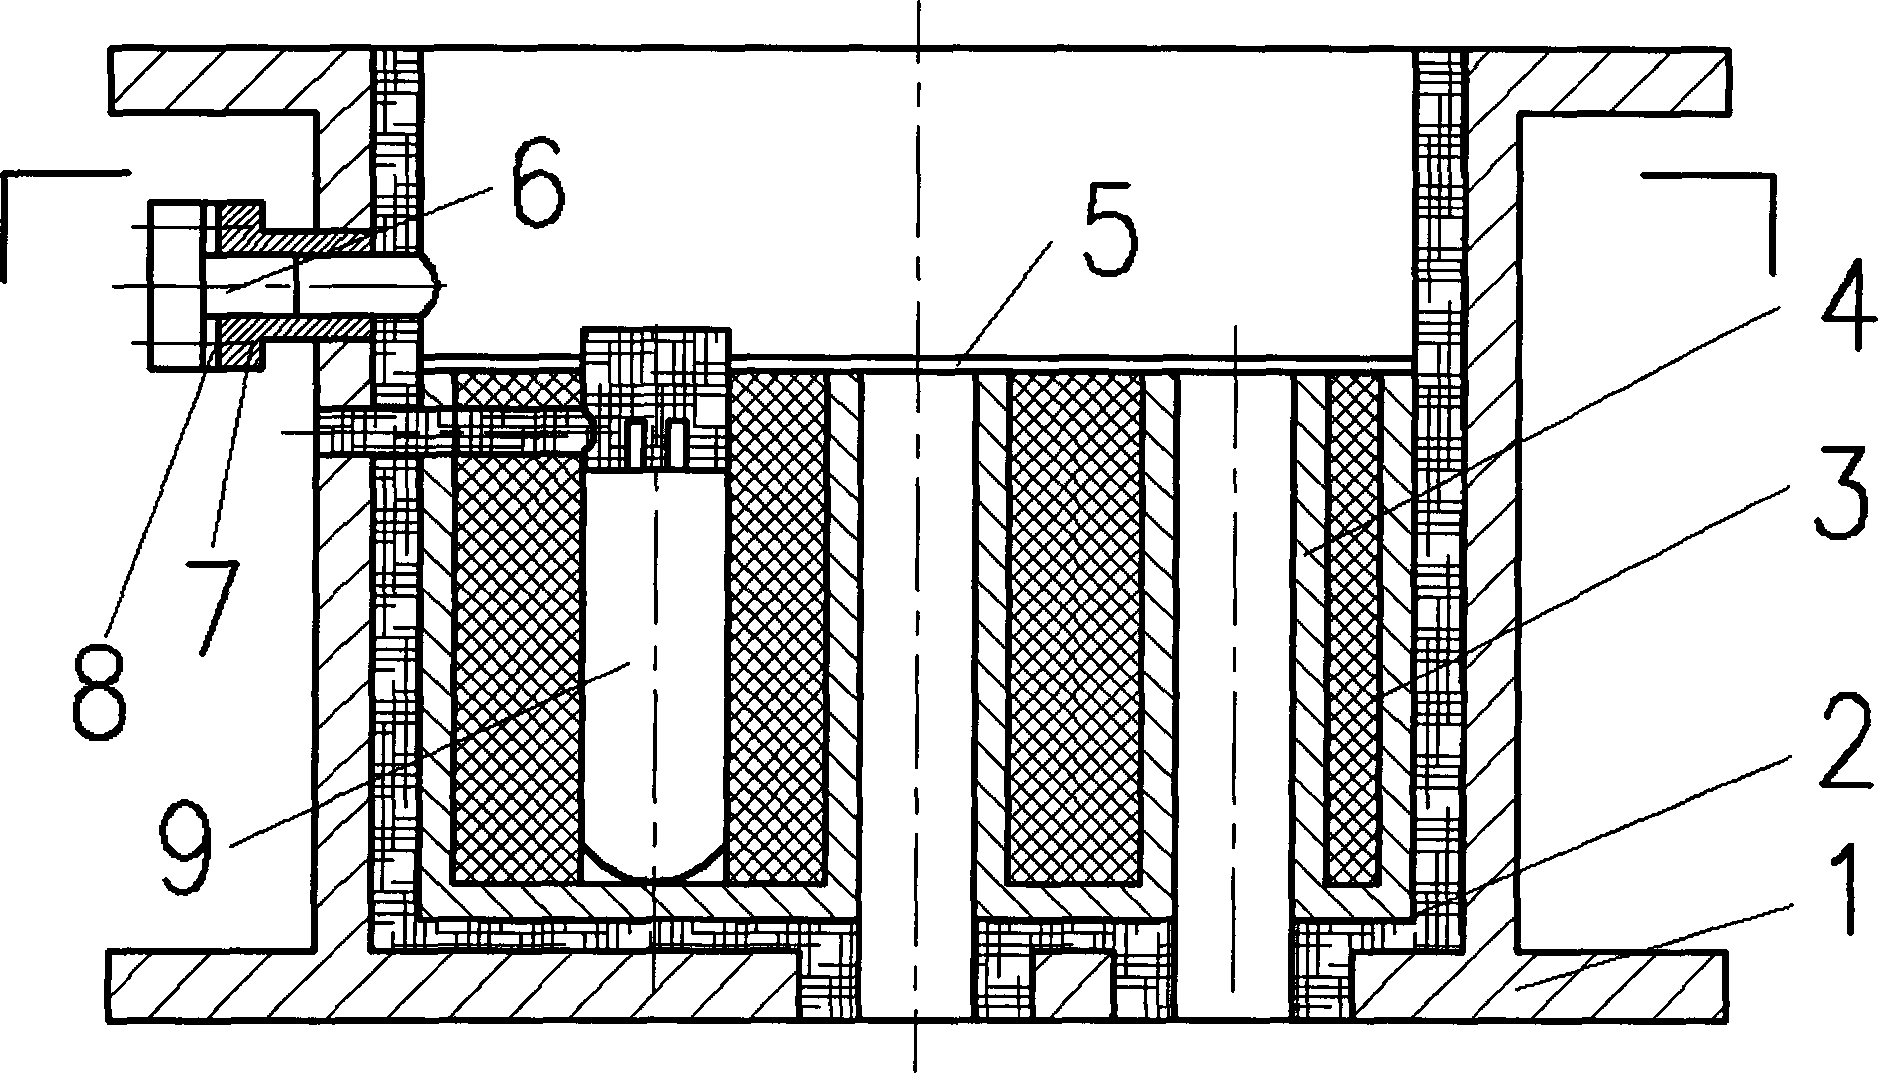 Device for constant high-temperature treatment prior to garbage incineration and flue gas purification